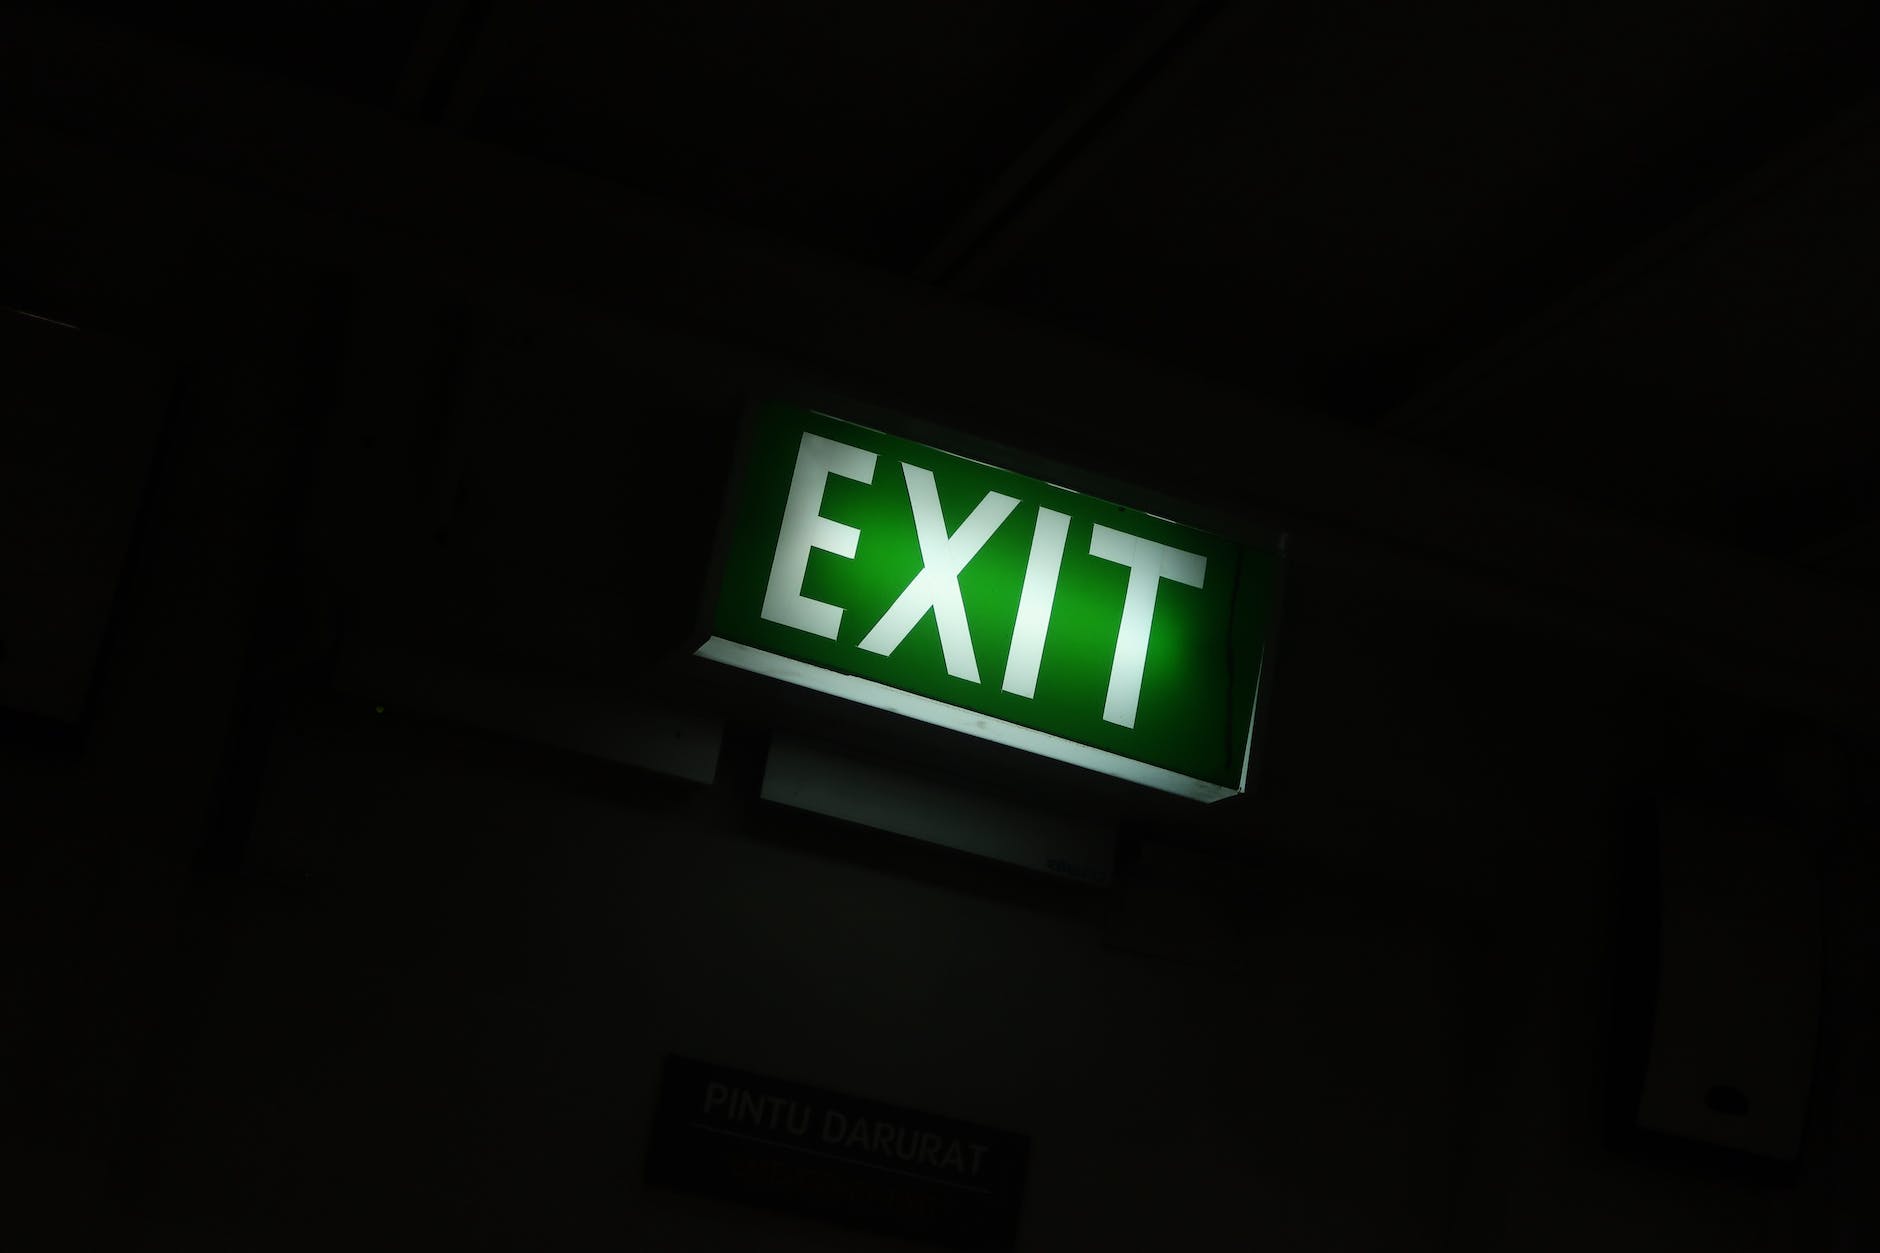 What’s going on with fintech startup exits?